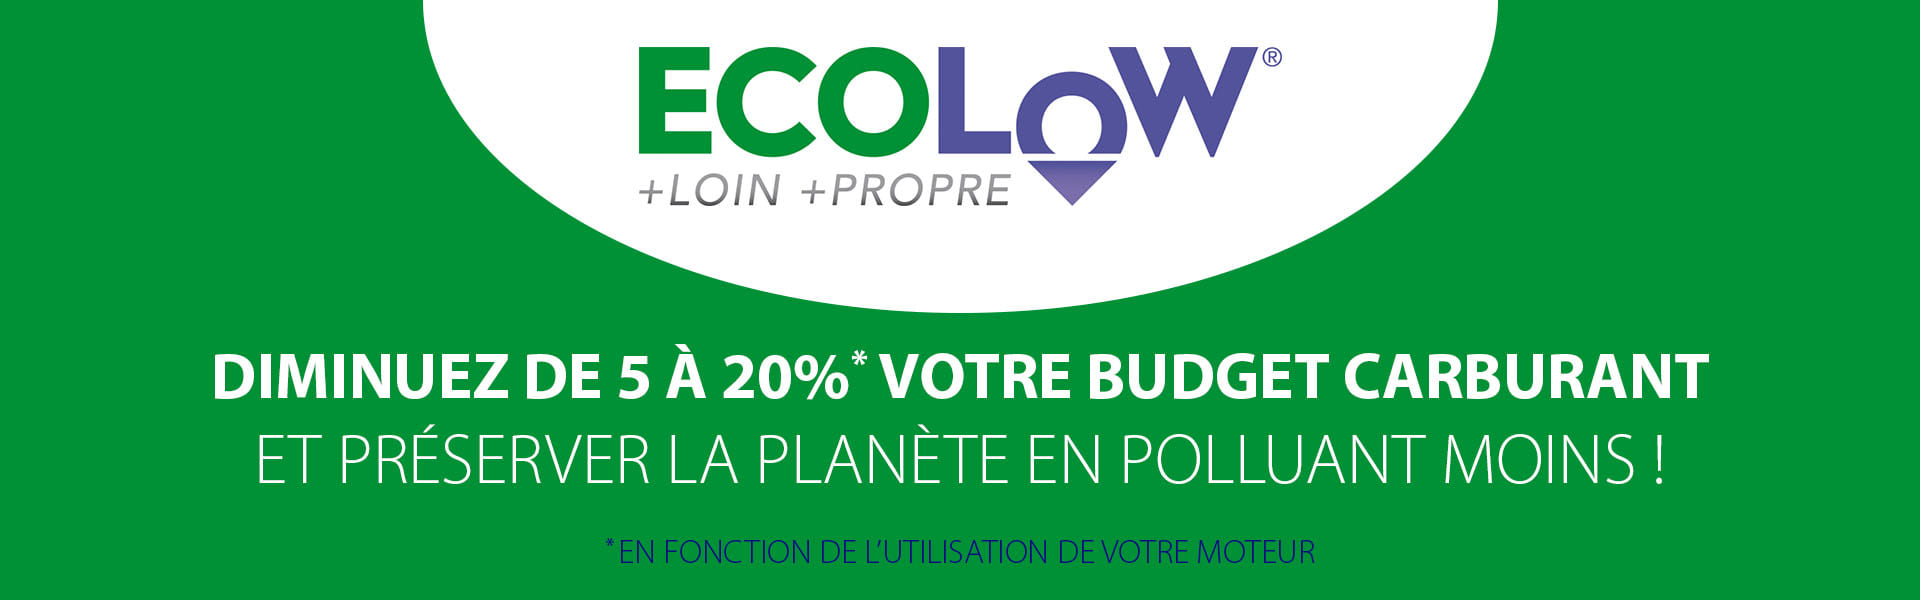 Ecolow